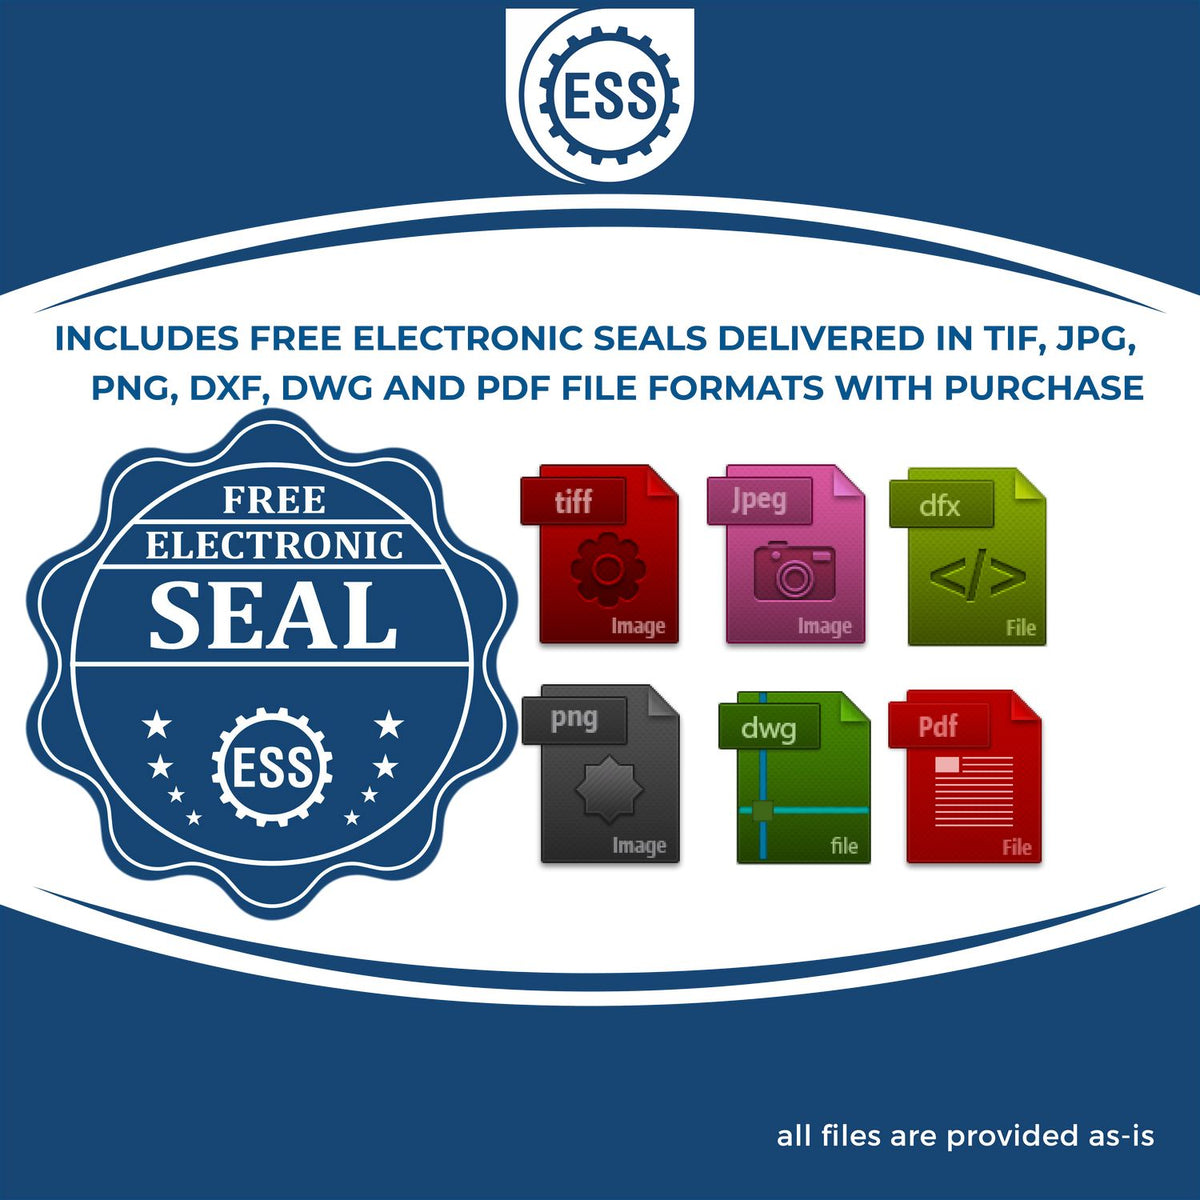 An infographic for the free electronic seal for the Gift North Dakota Geologist Seal illustrating the different file type icons such as DXF, DWG, TIF, JPG and PNG.